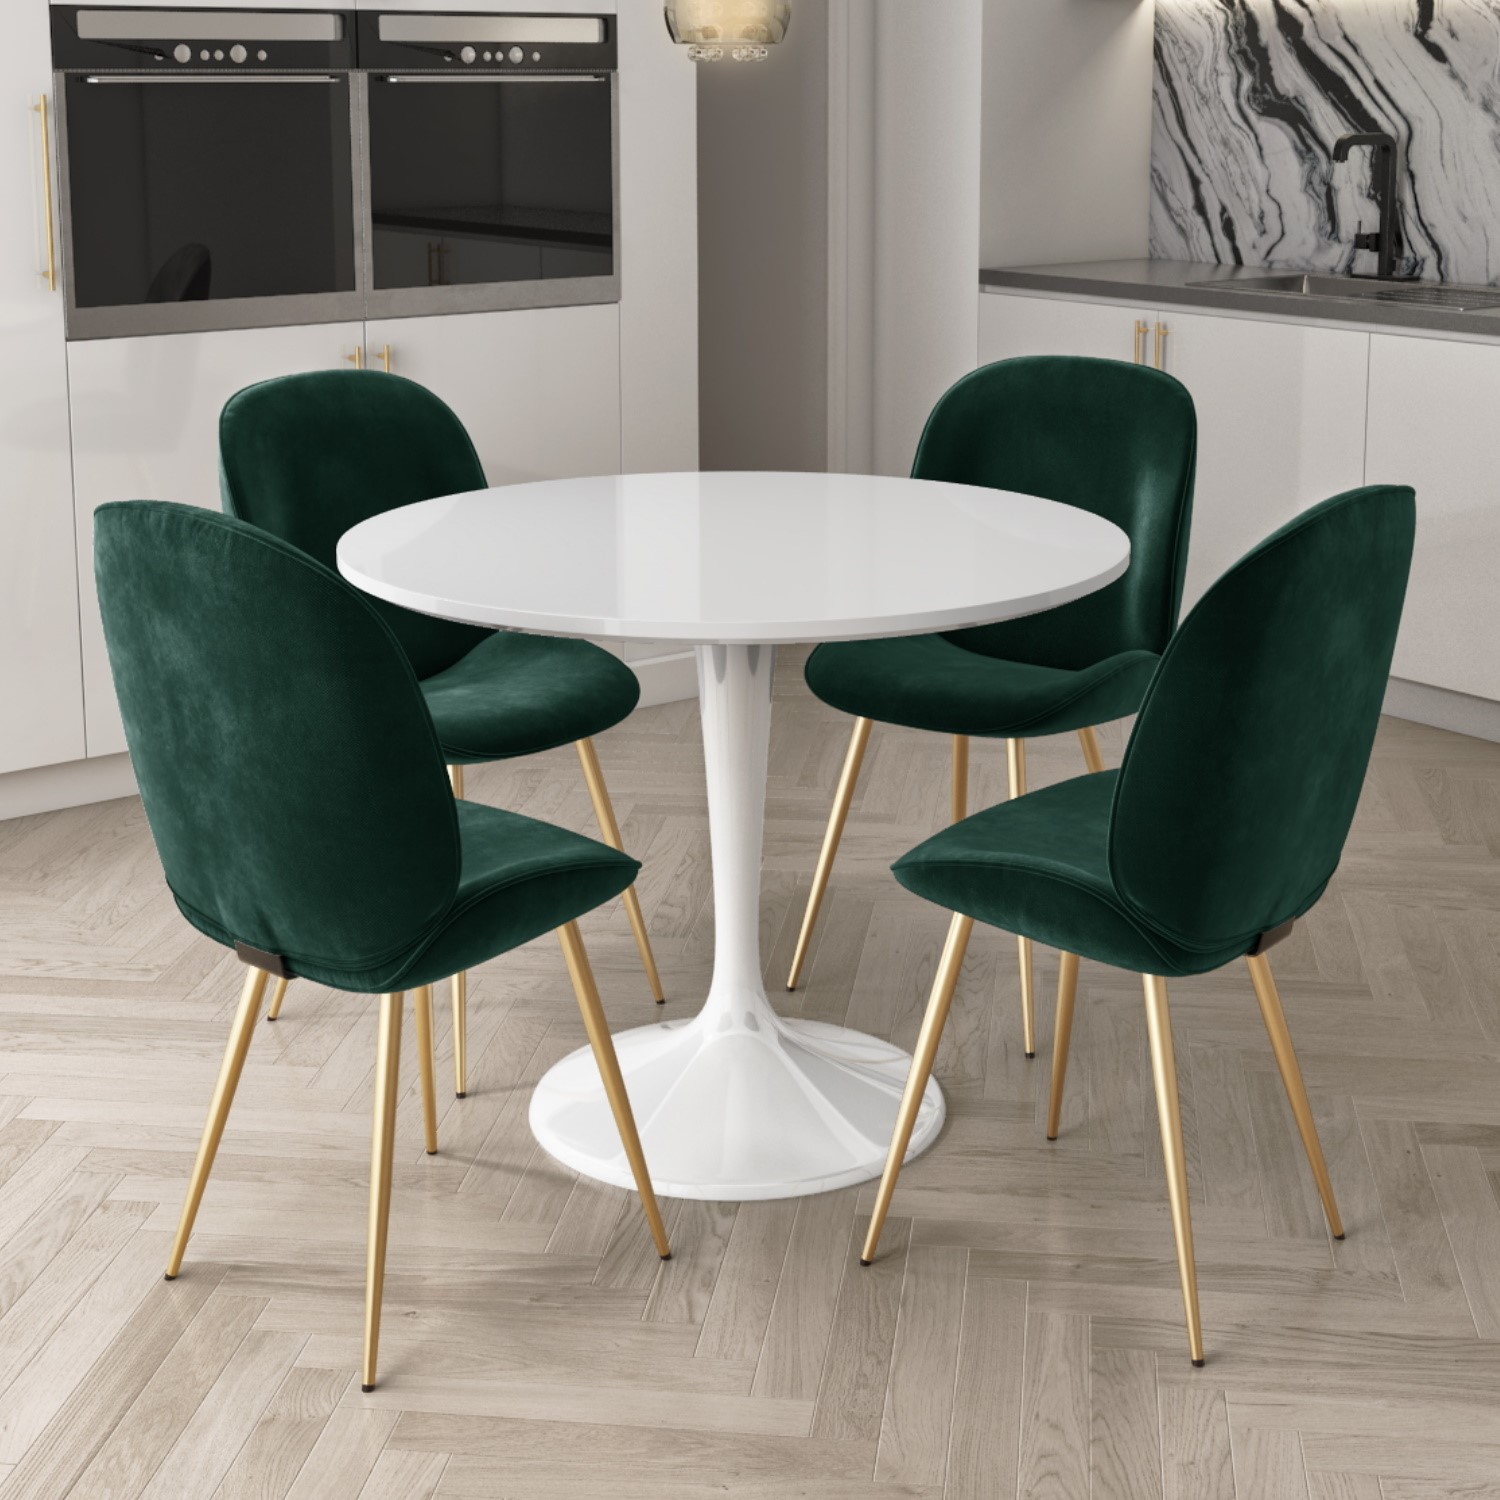 Aura White Round High Gloss Dining, White High Gloss Round Dining Table And 4 Chairs